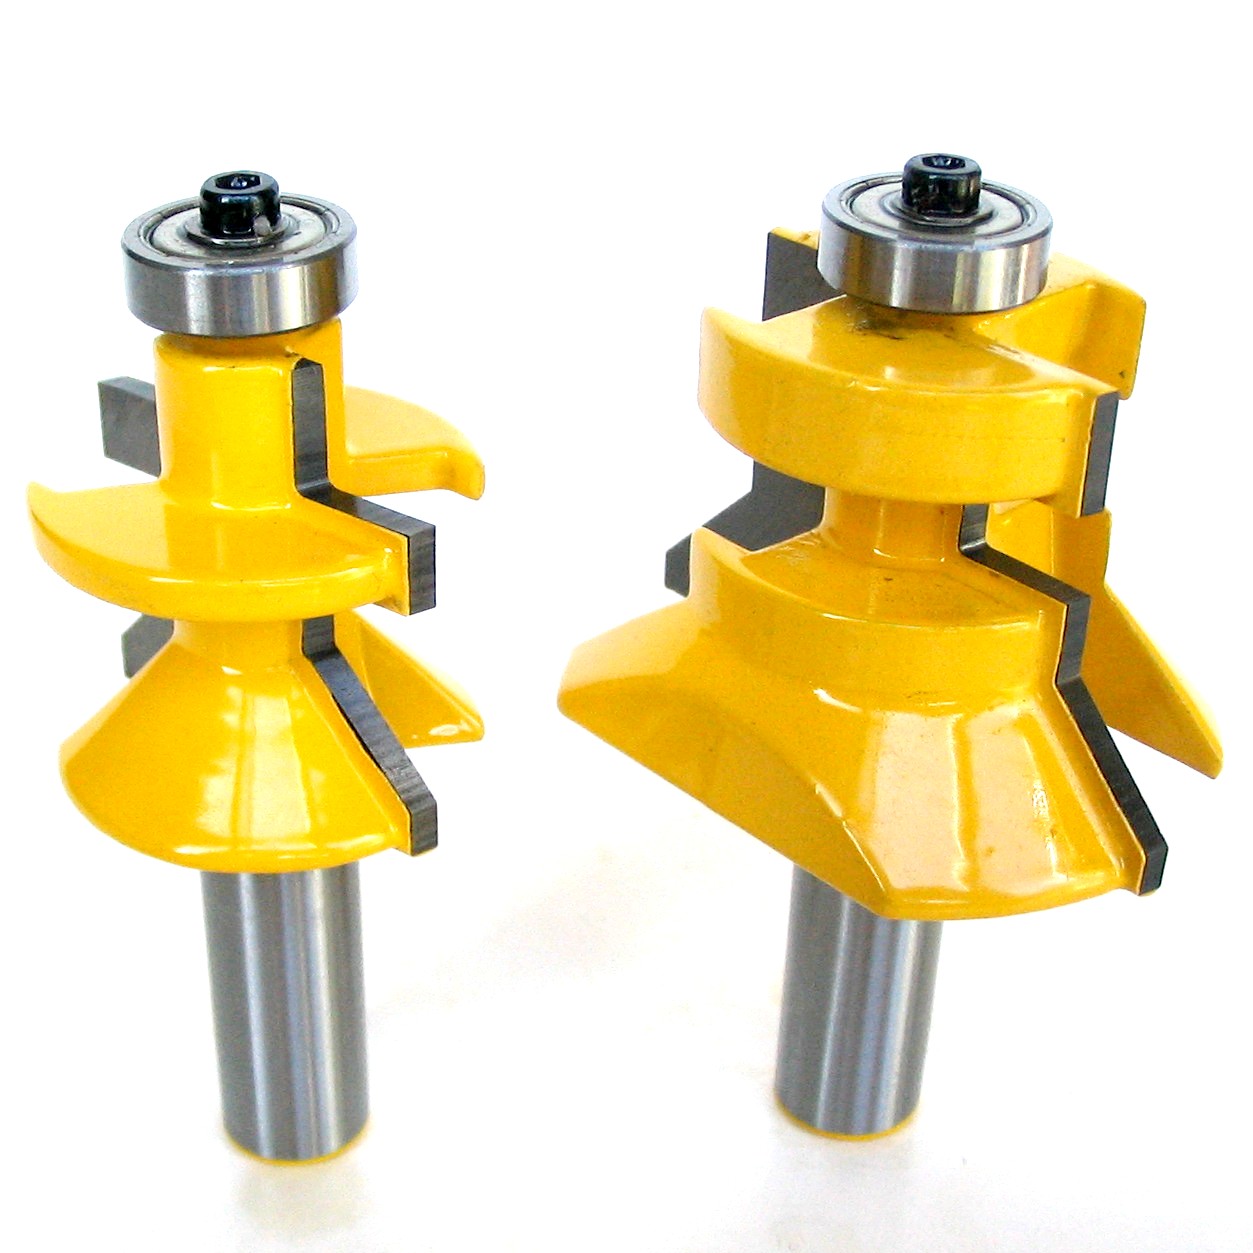 2 Pc 12 Shank V Joint V Notch Tongue And Groove Joint Router Bit Set S Ebay 